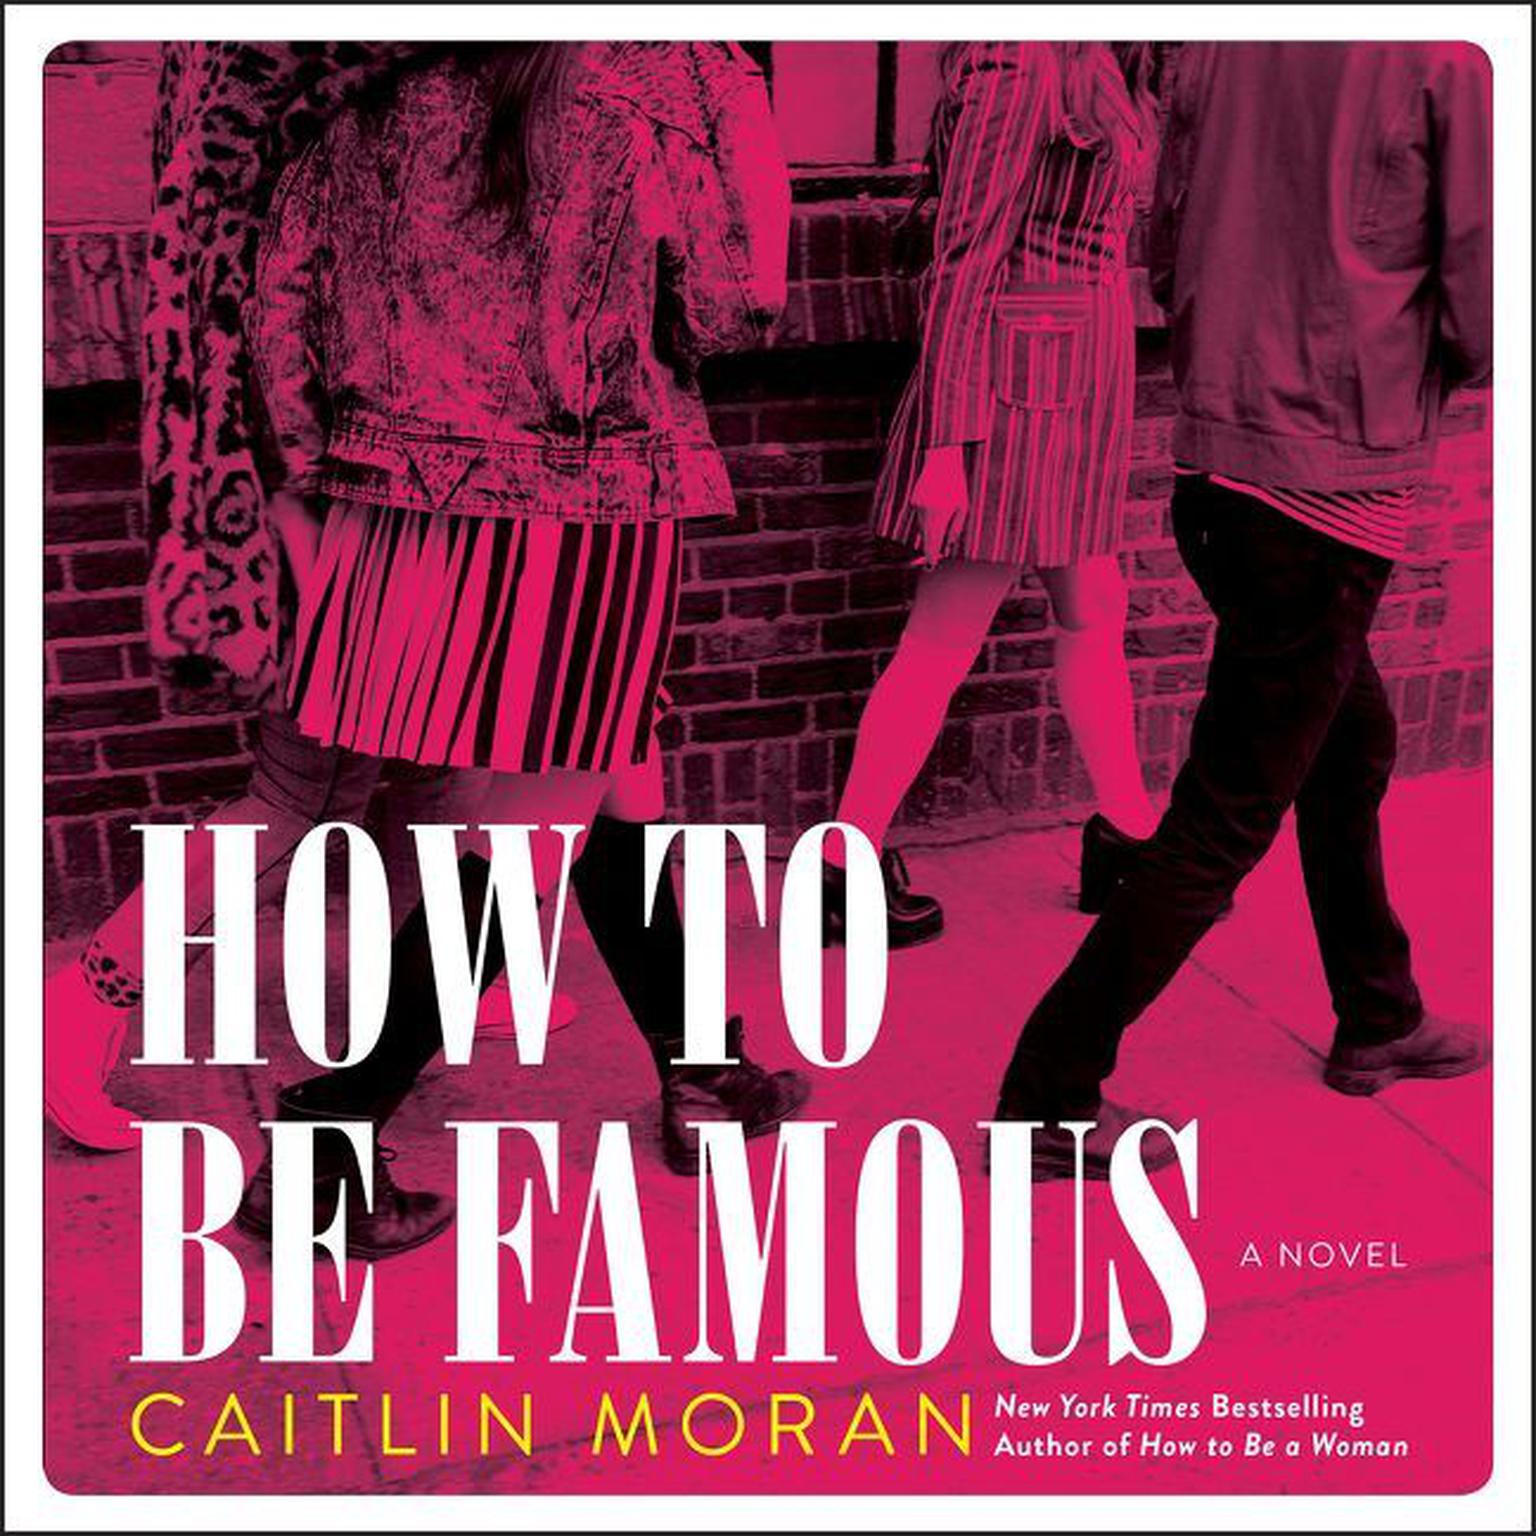 How to Be Famous: A Novel Audiobook, by Caitlin Moran